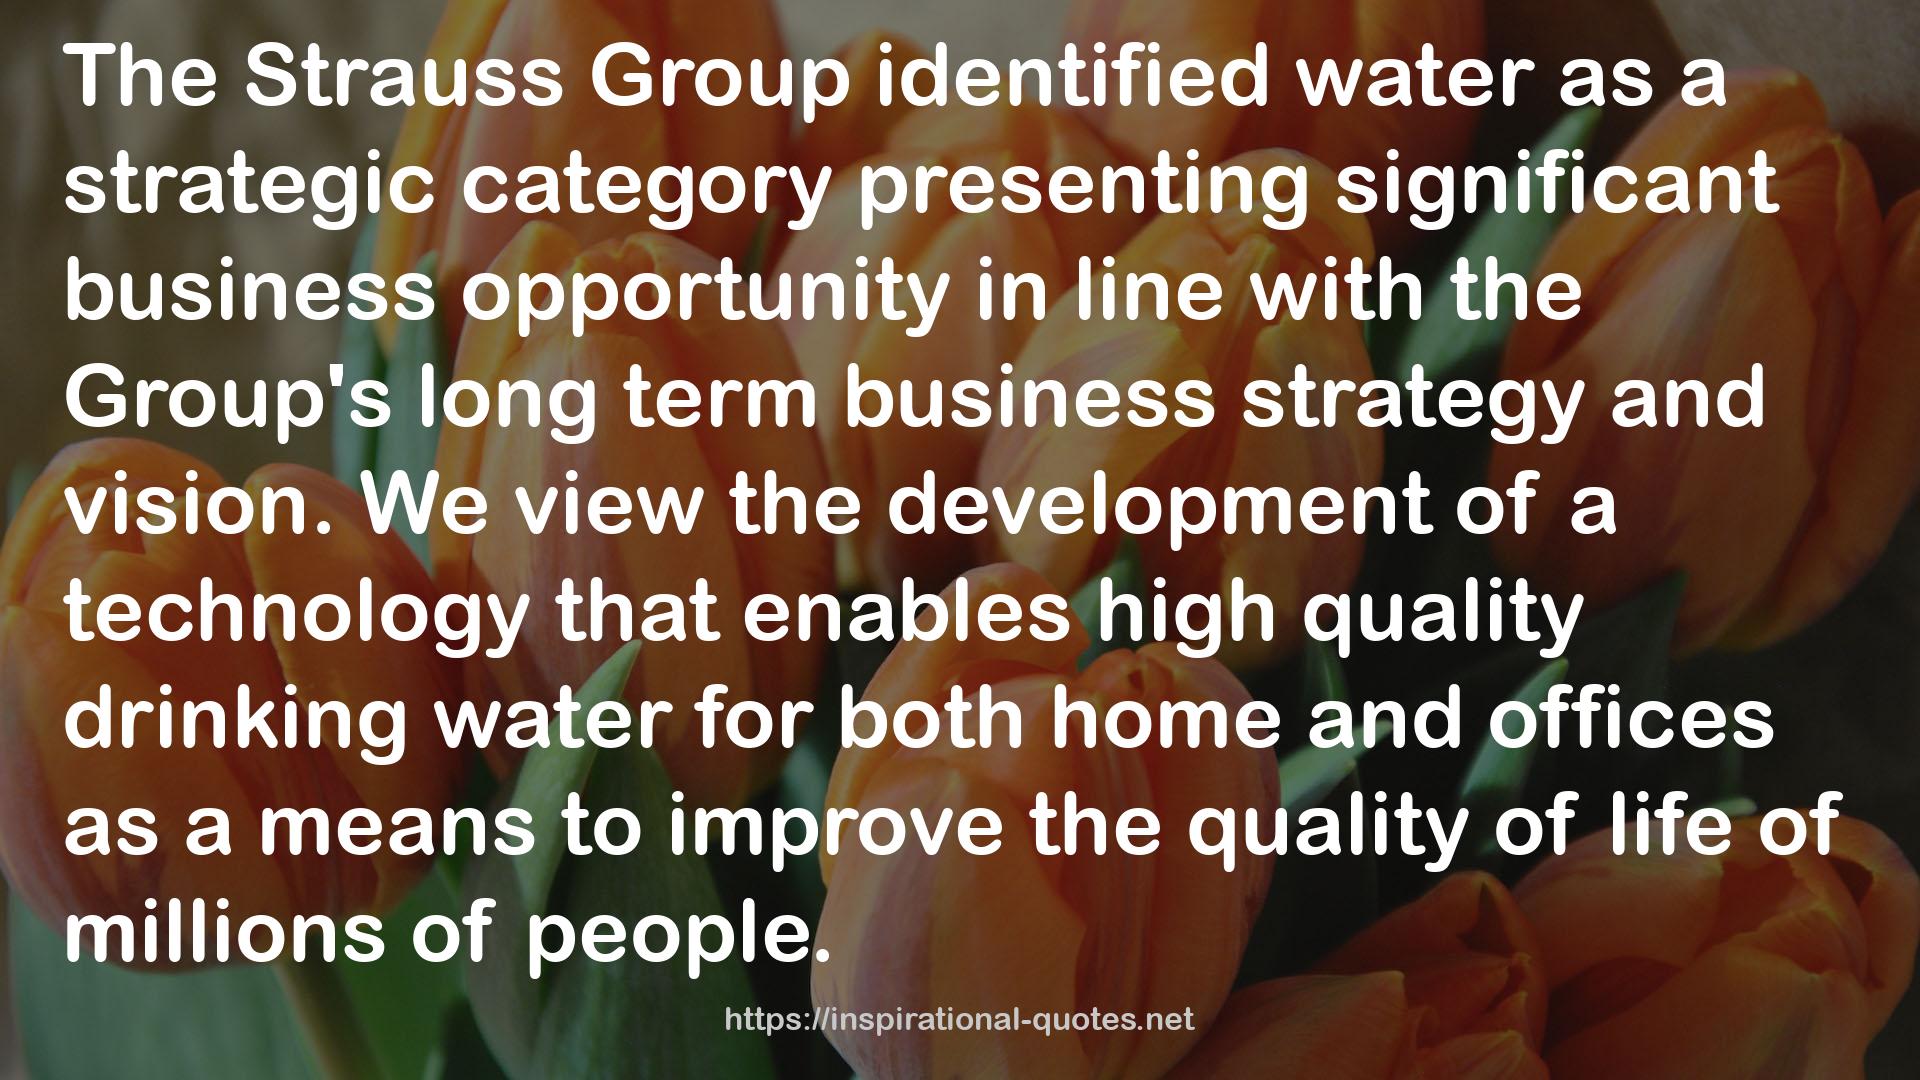 the Group's long term business strategy  QUOTES